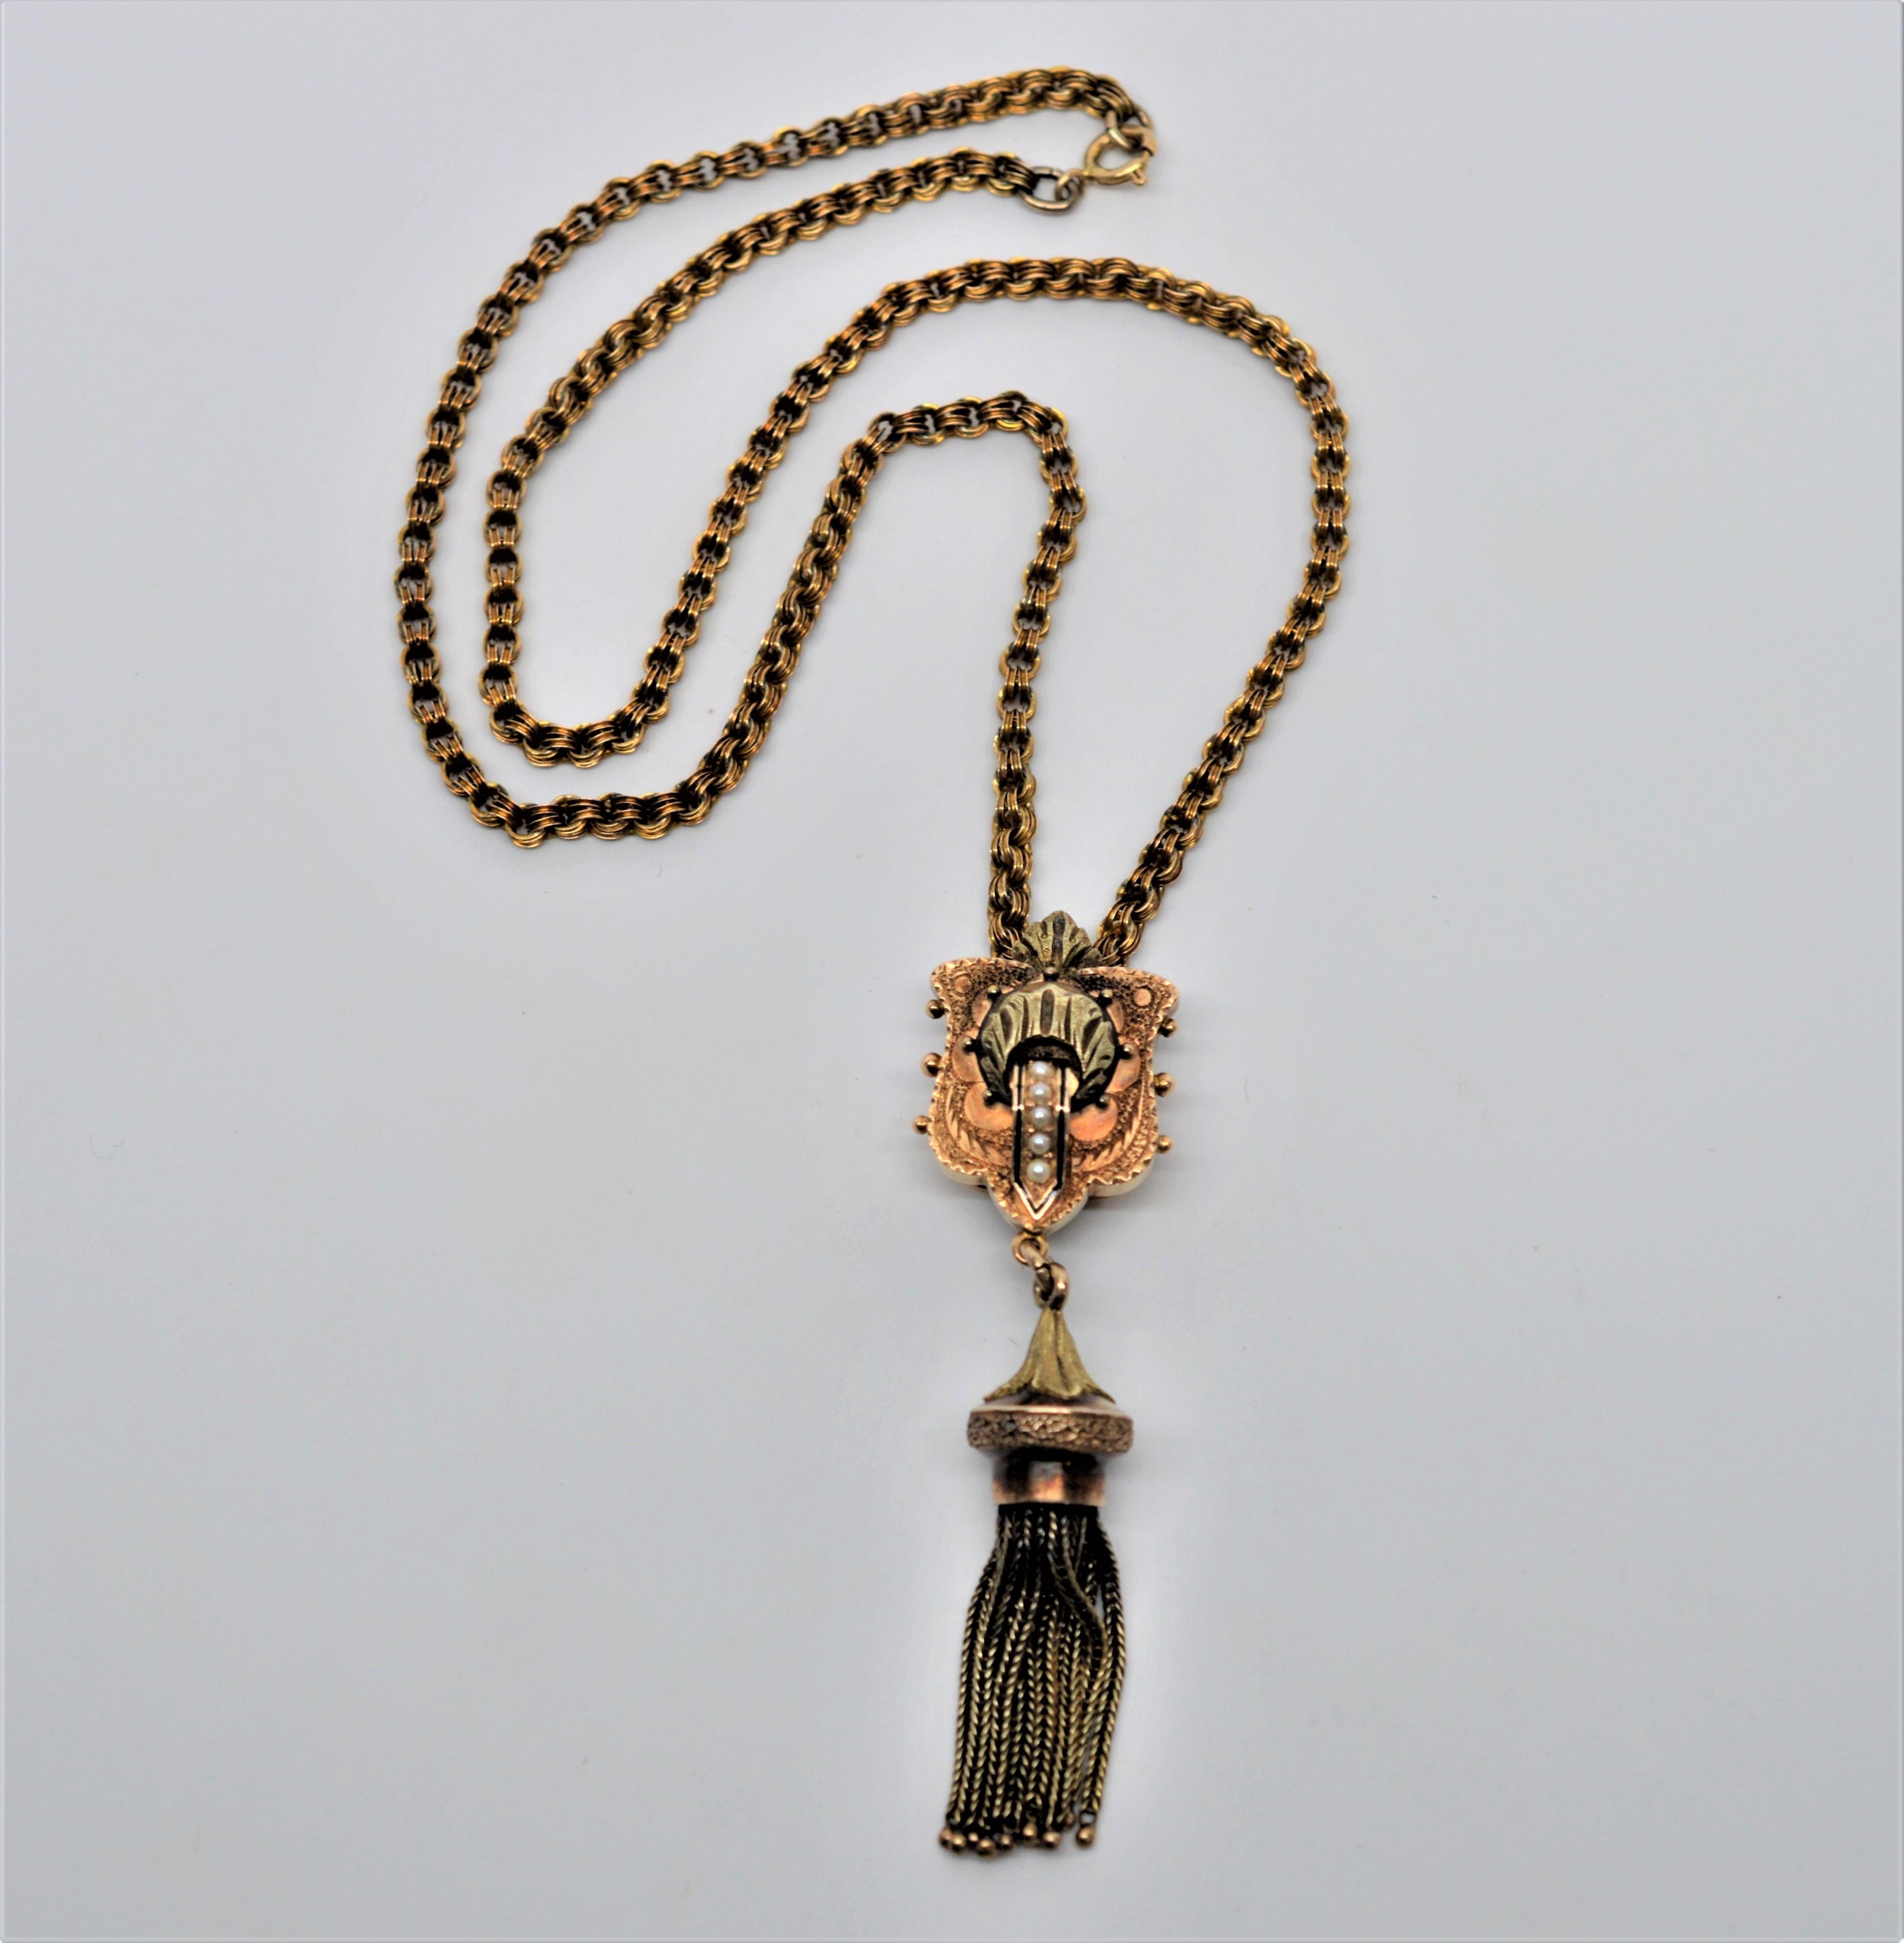 Antique Yellow Gold Pendant Tassel Necklace In Good Condition For Sale In Mount Kisco, NY